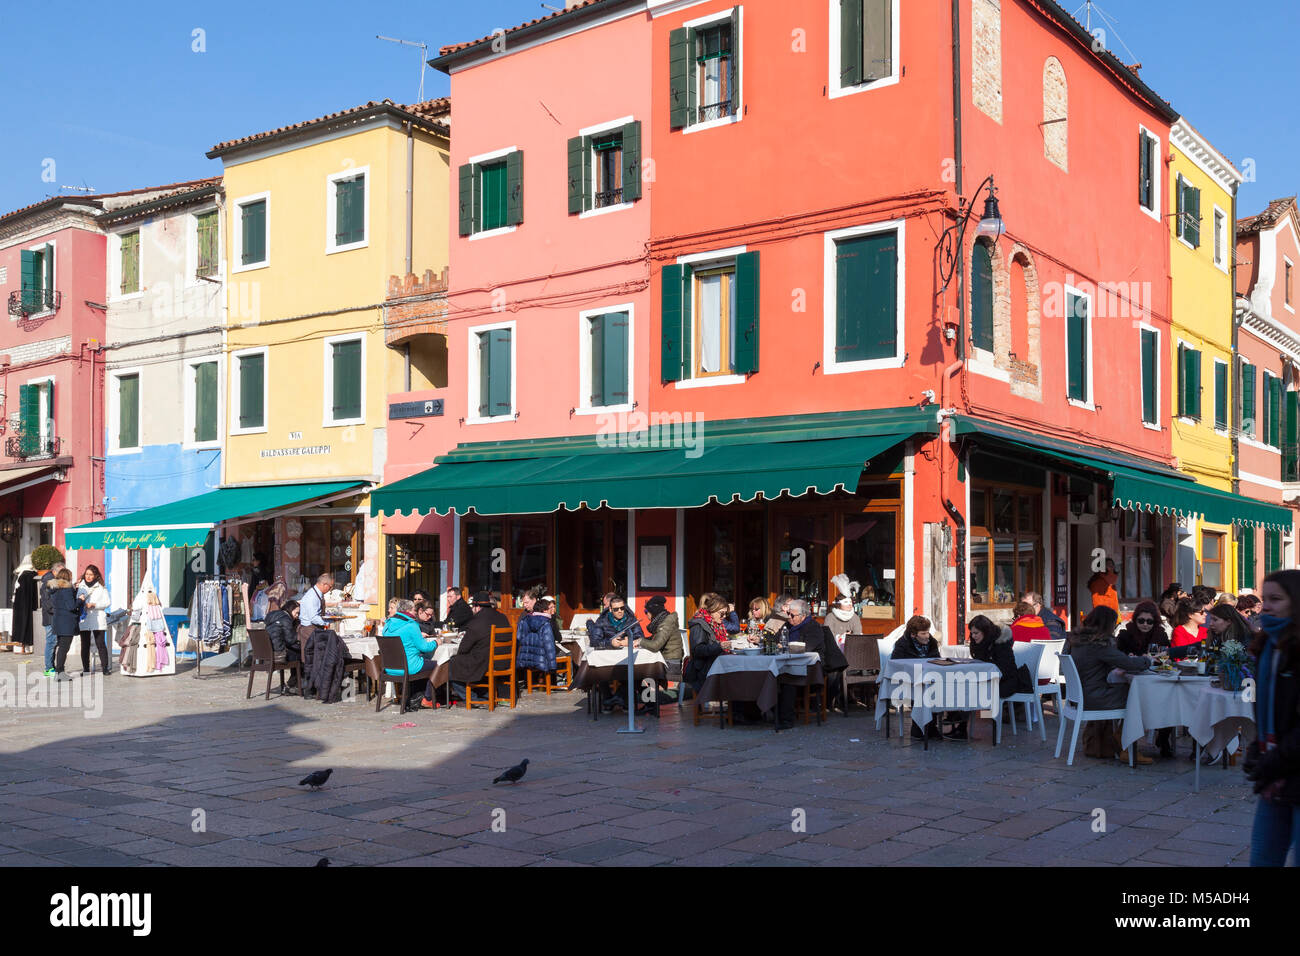 Burano Island, Venice, Veneto, italy. People dining at a corner restaurant on Via Baldassare Galuppi on a sunny winter day with colorful architecture Stock Photo